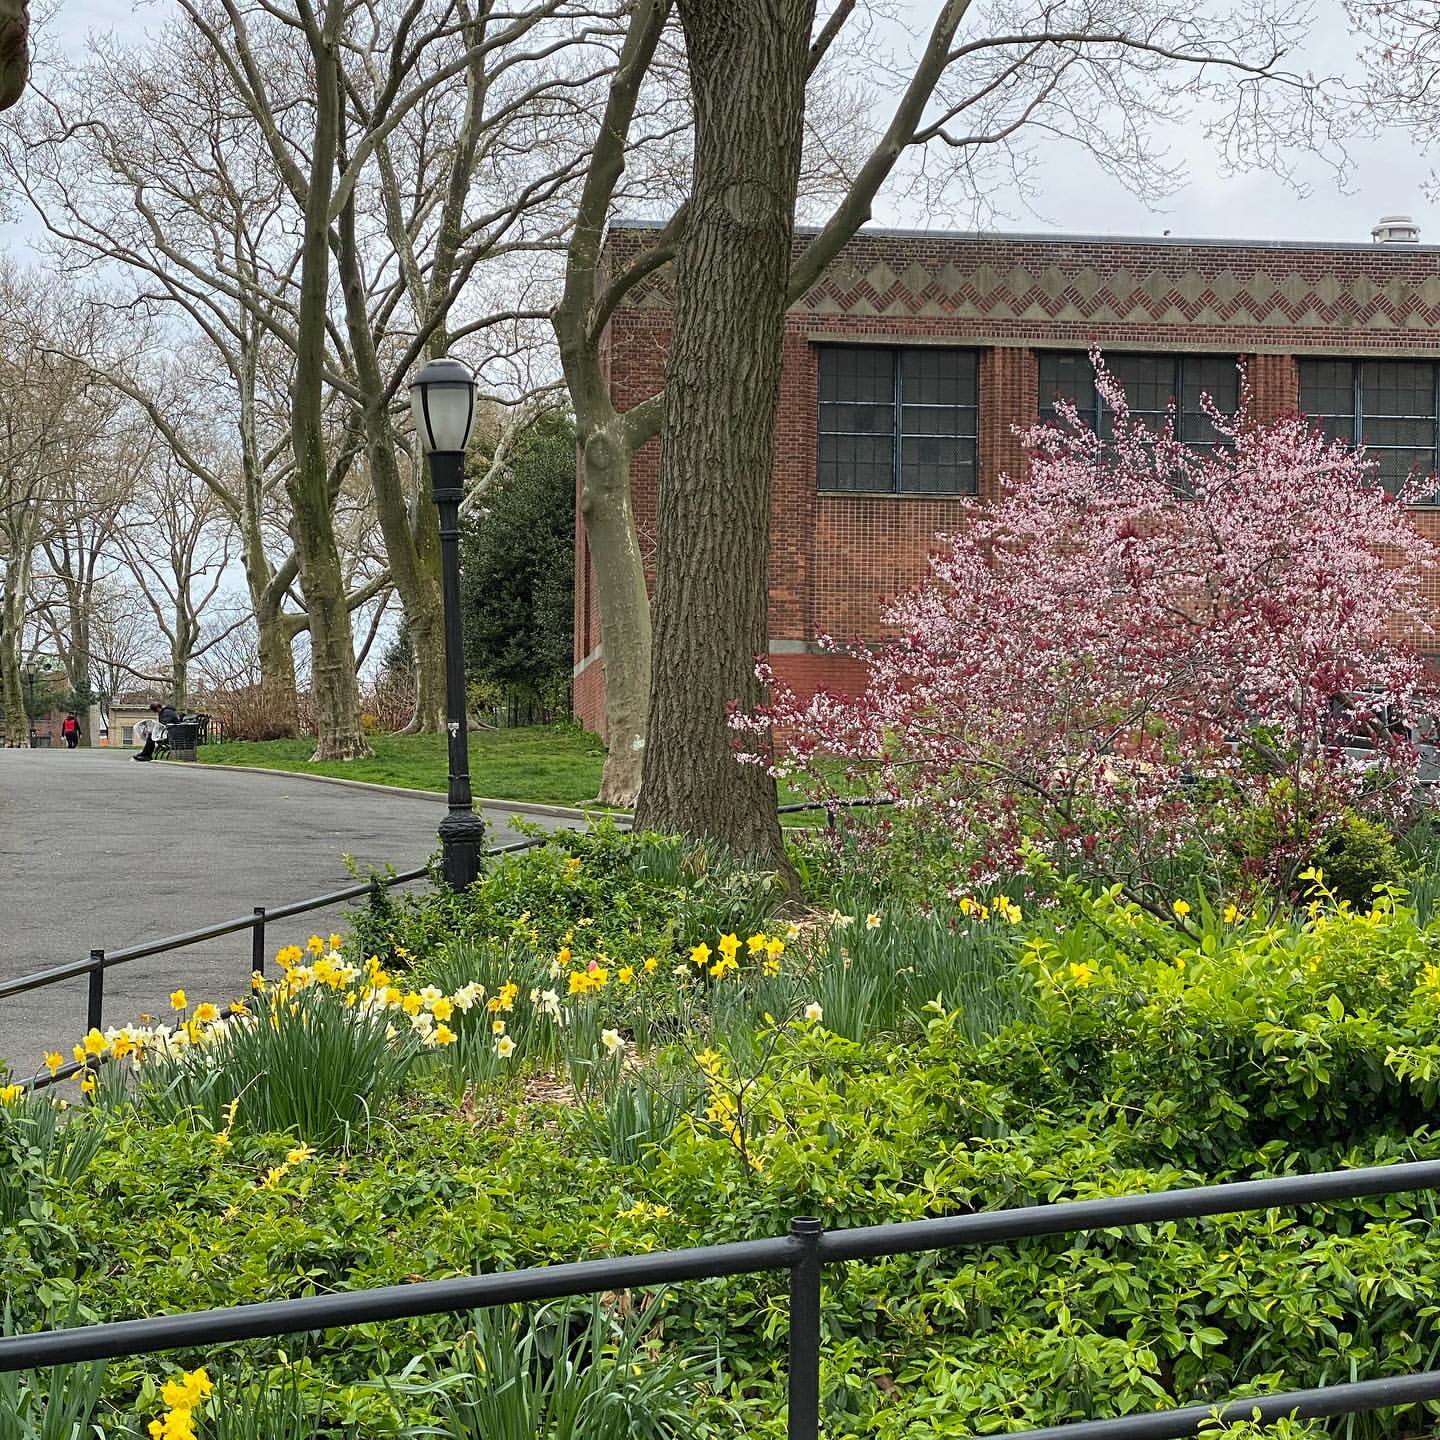 A peaceful park scene with blooming daffodils and a pink-flowered tree in the foreground, a lamp post to the left, and a brick building with large windows in the background.